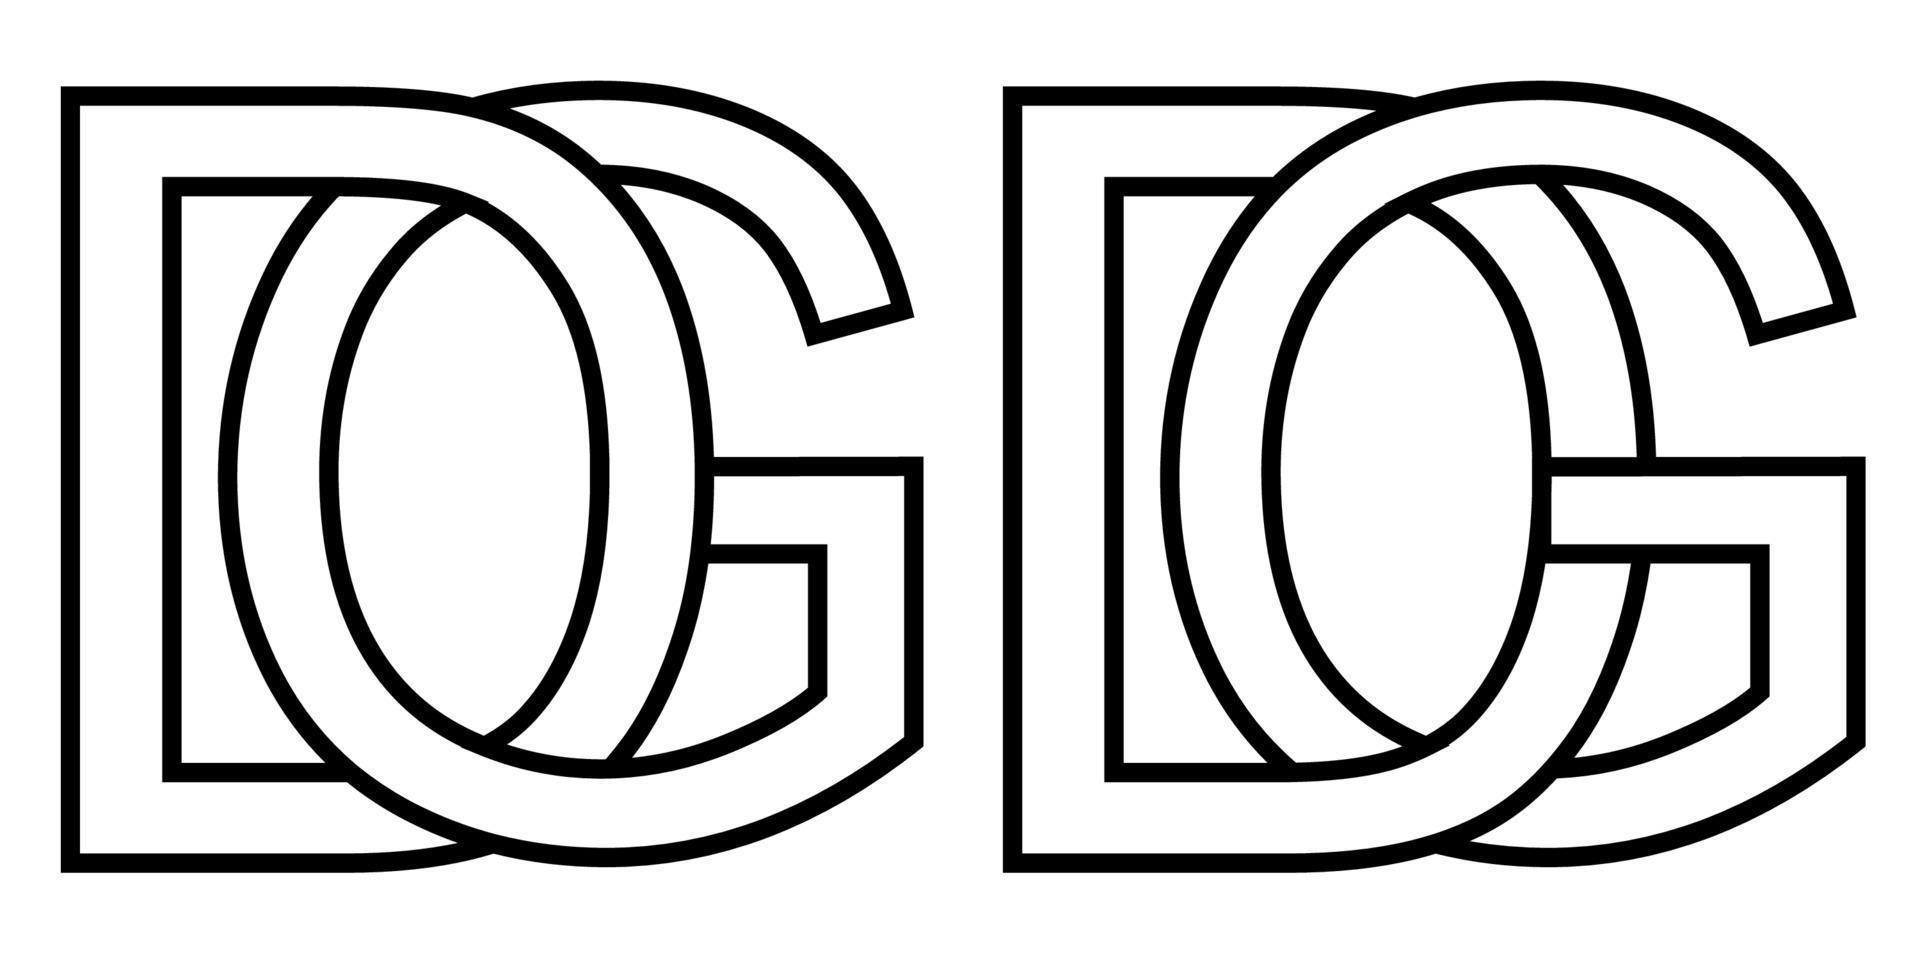 Logo gd  dg icon sign two interlaced letters G D, vector logo gd dg first capital letters pattern alphabet g d